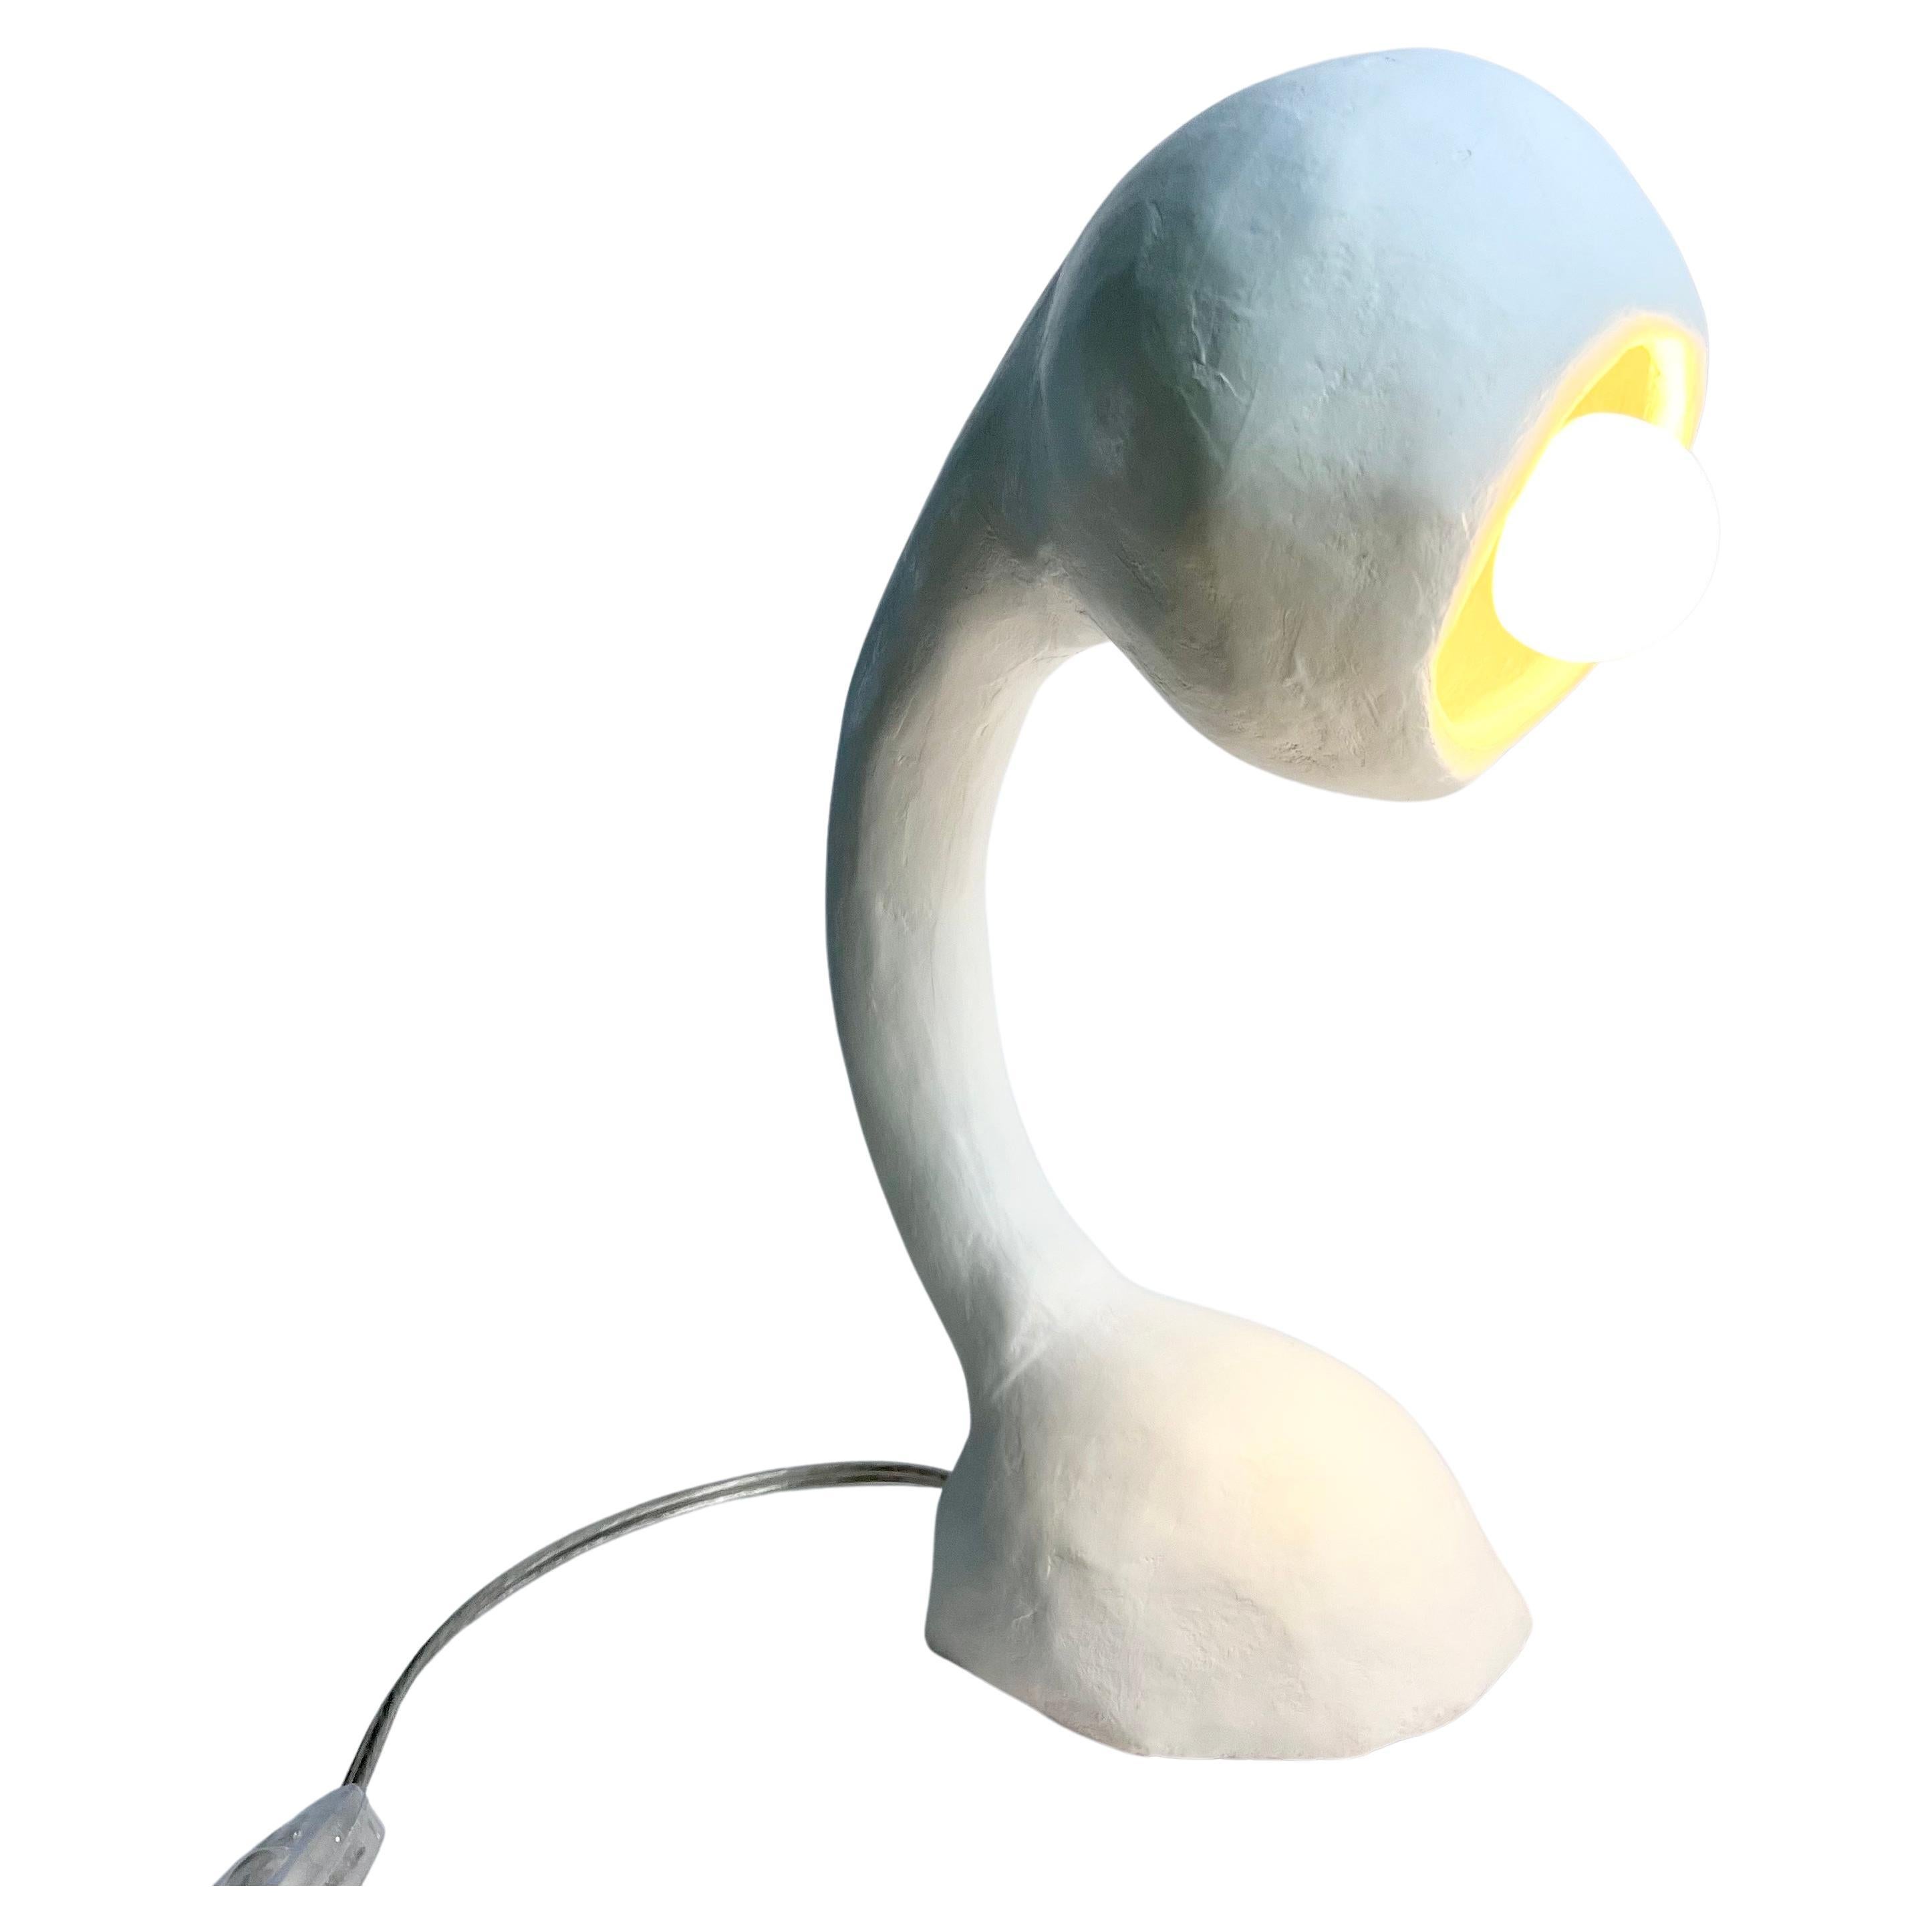 Description:
White table lamp. Ceramic socket. Included round LED G16 40W candelabra bulb in a soft white. 8’-0” clear cord. This particular Biomorphic light fixture is upright, functioning as a task or reading lamp with a slight tilt to the